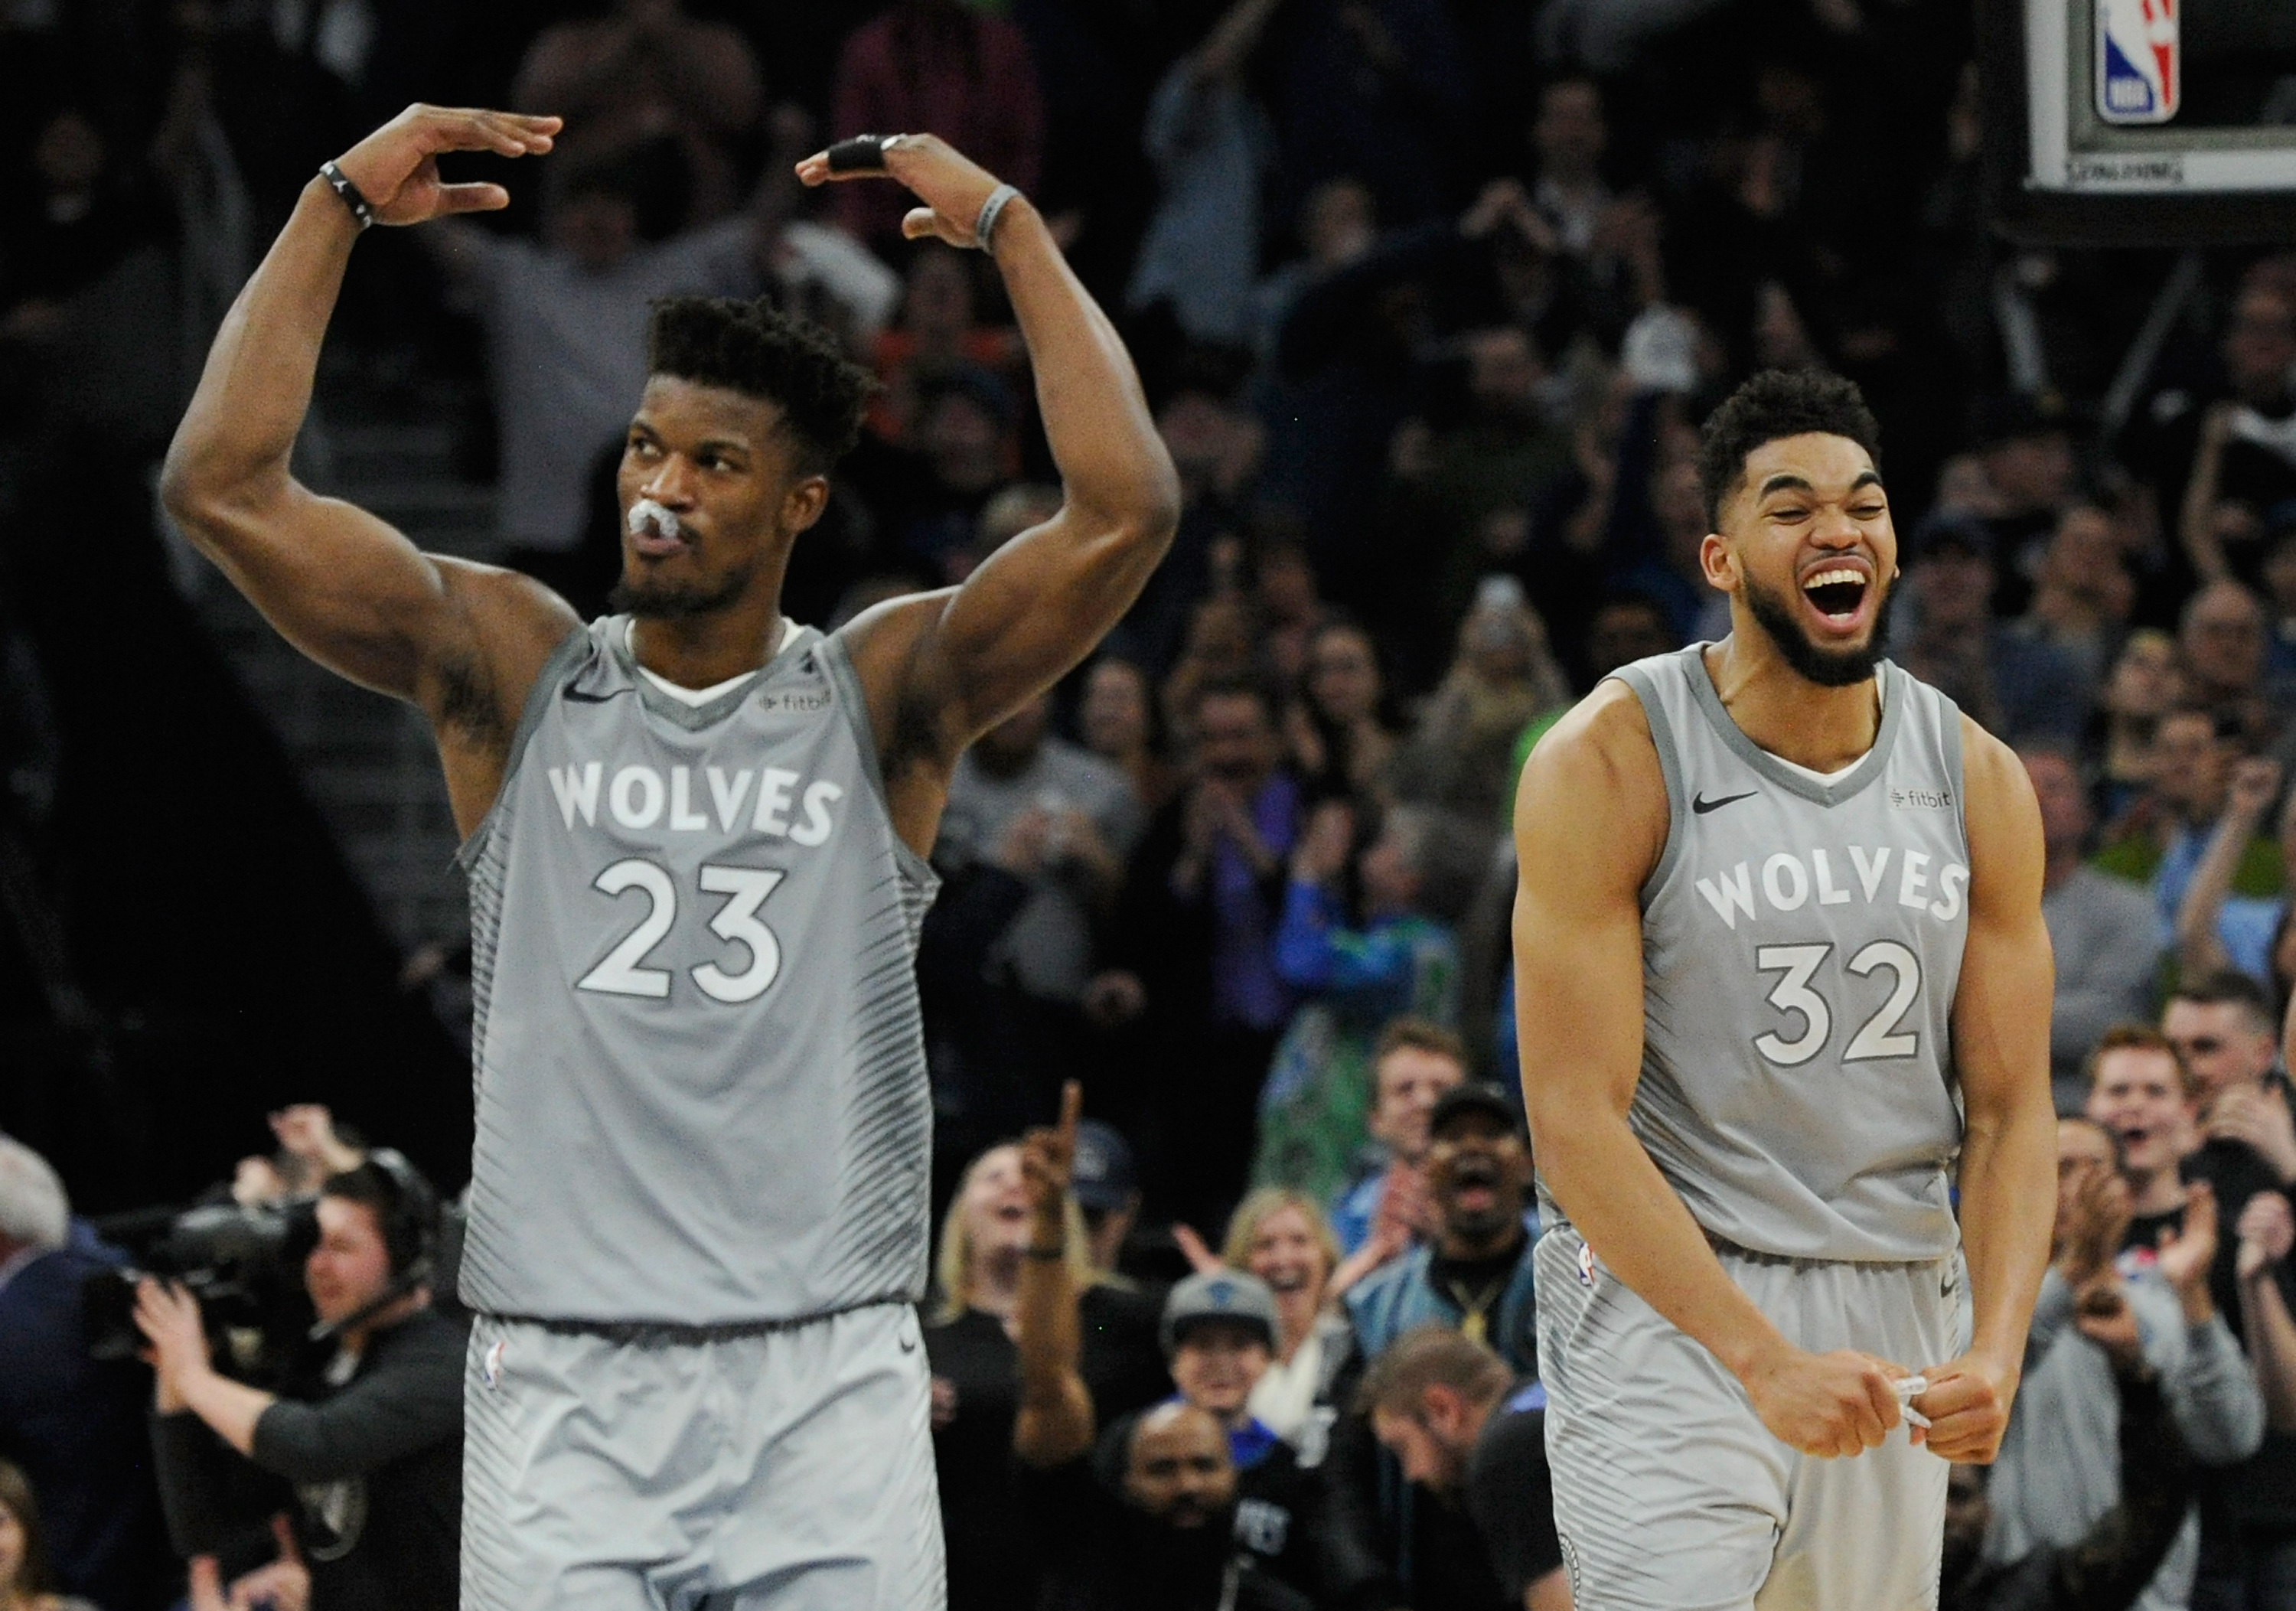 Jimmy Butler requests trade from Minnesota Timberwolves